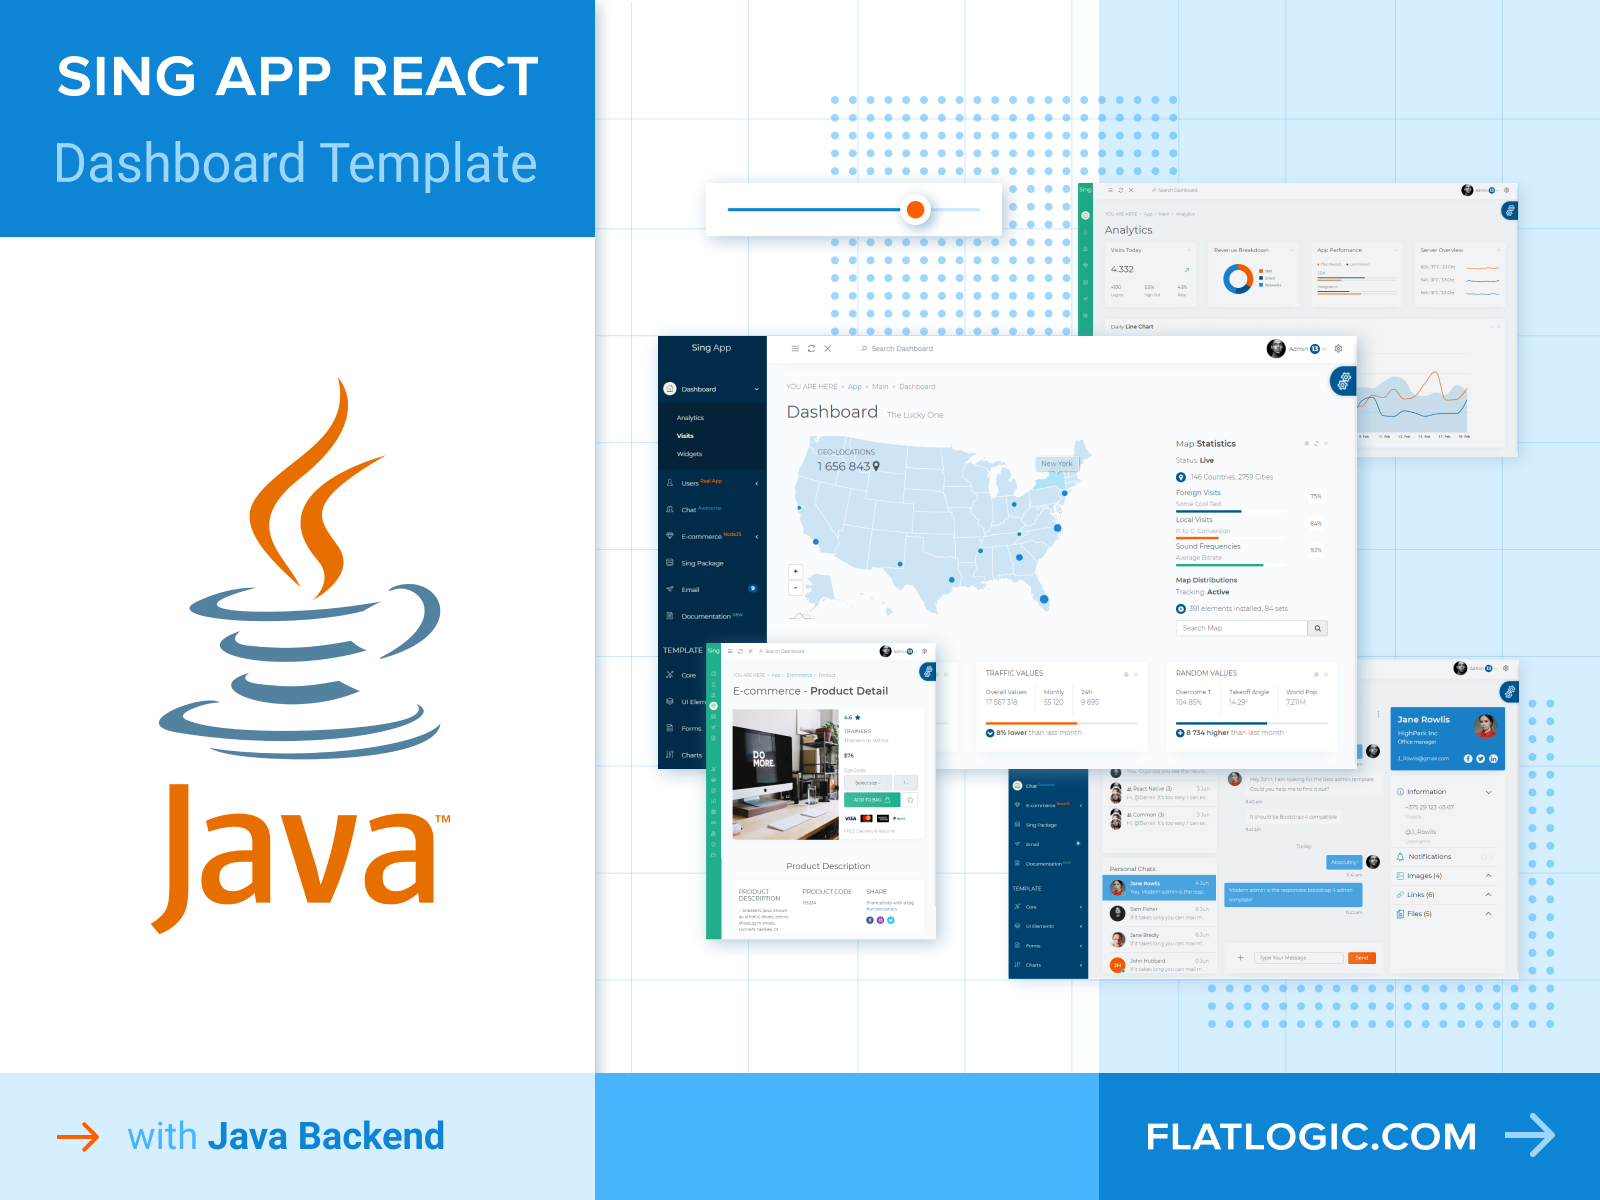 java backend with react